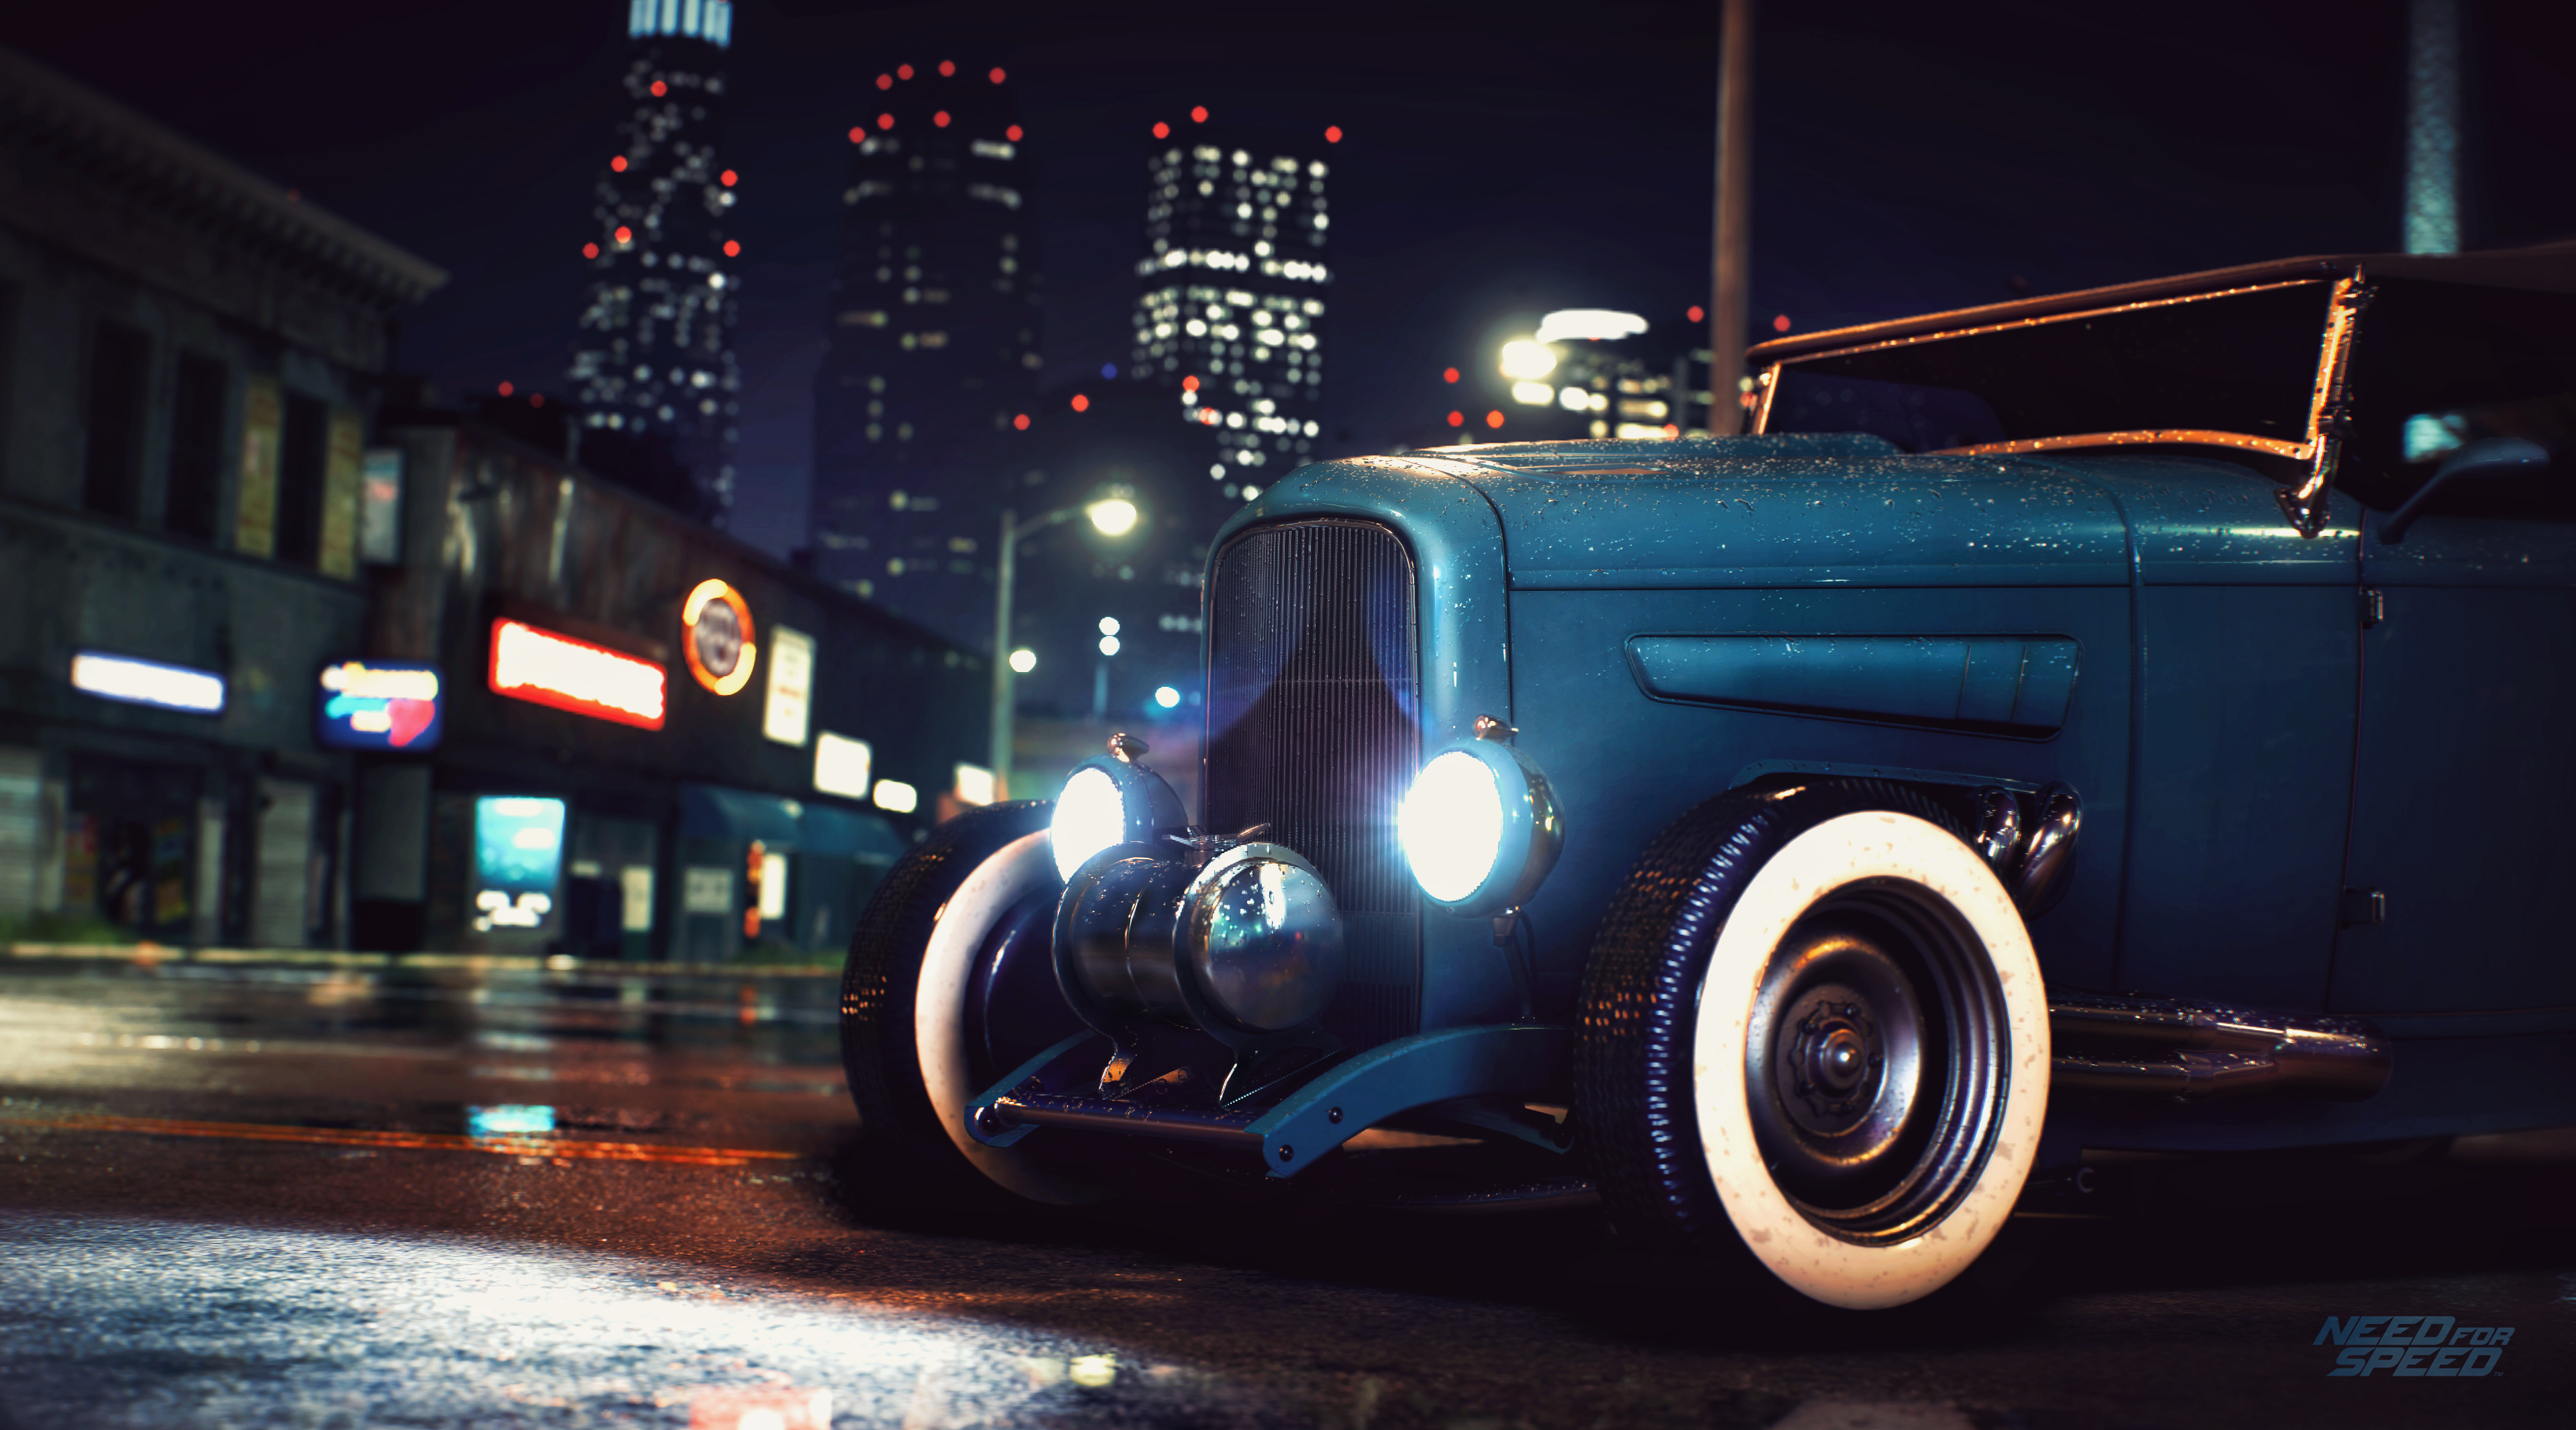 Need For Speed Need For Speed 2015 1973 Ford LTD Night Race Cars Hot Rod Video Games Car Video Game  3840x2132